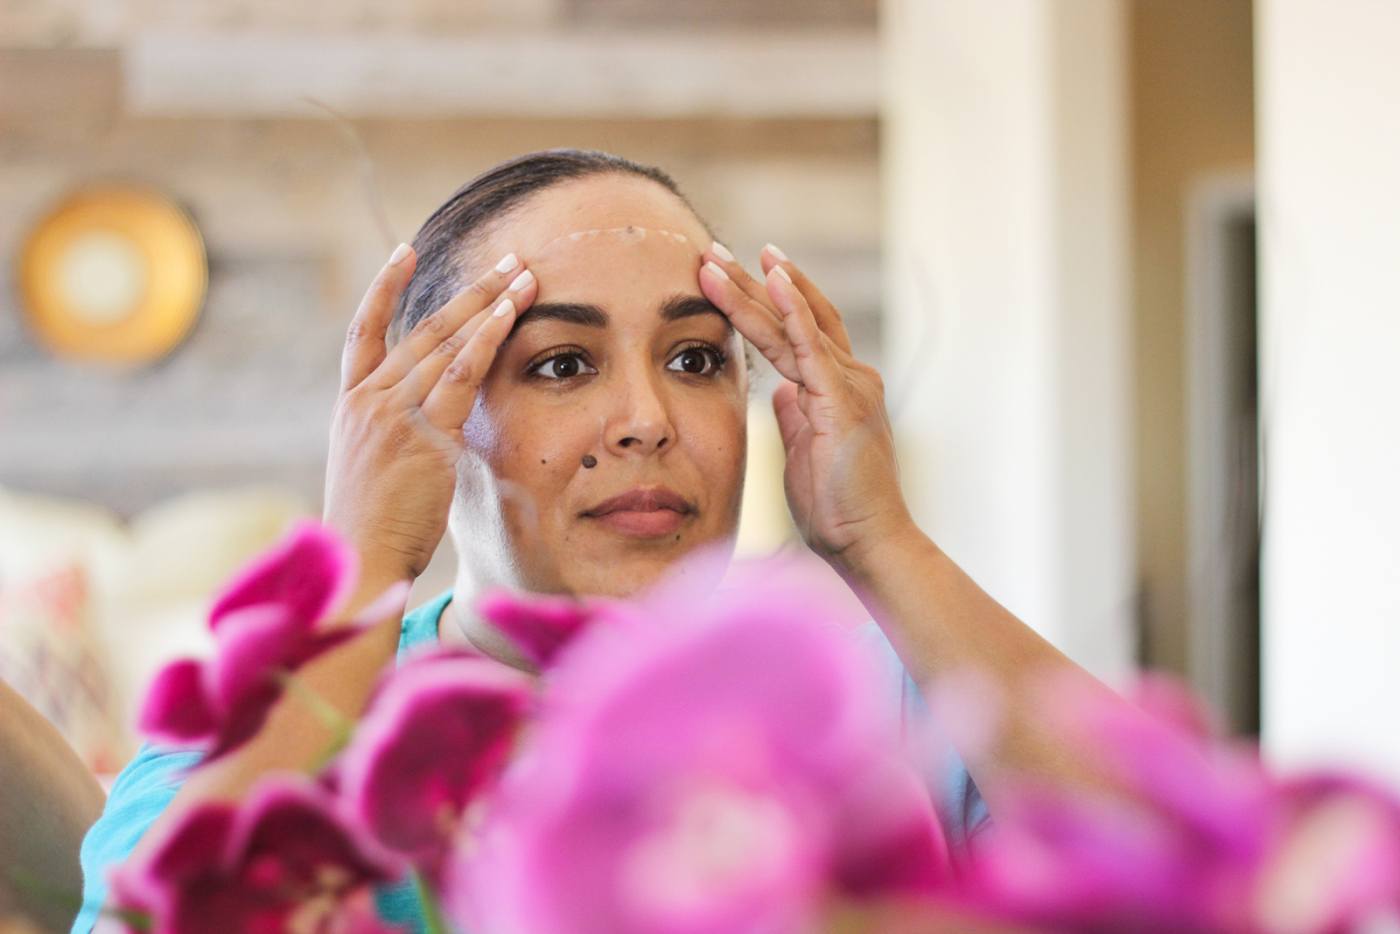 Tired of seeing fine lines and wrinkles across your forehead? Read now, how to get rid of those pesky forehead wrinkles without any needles.